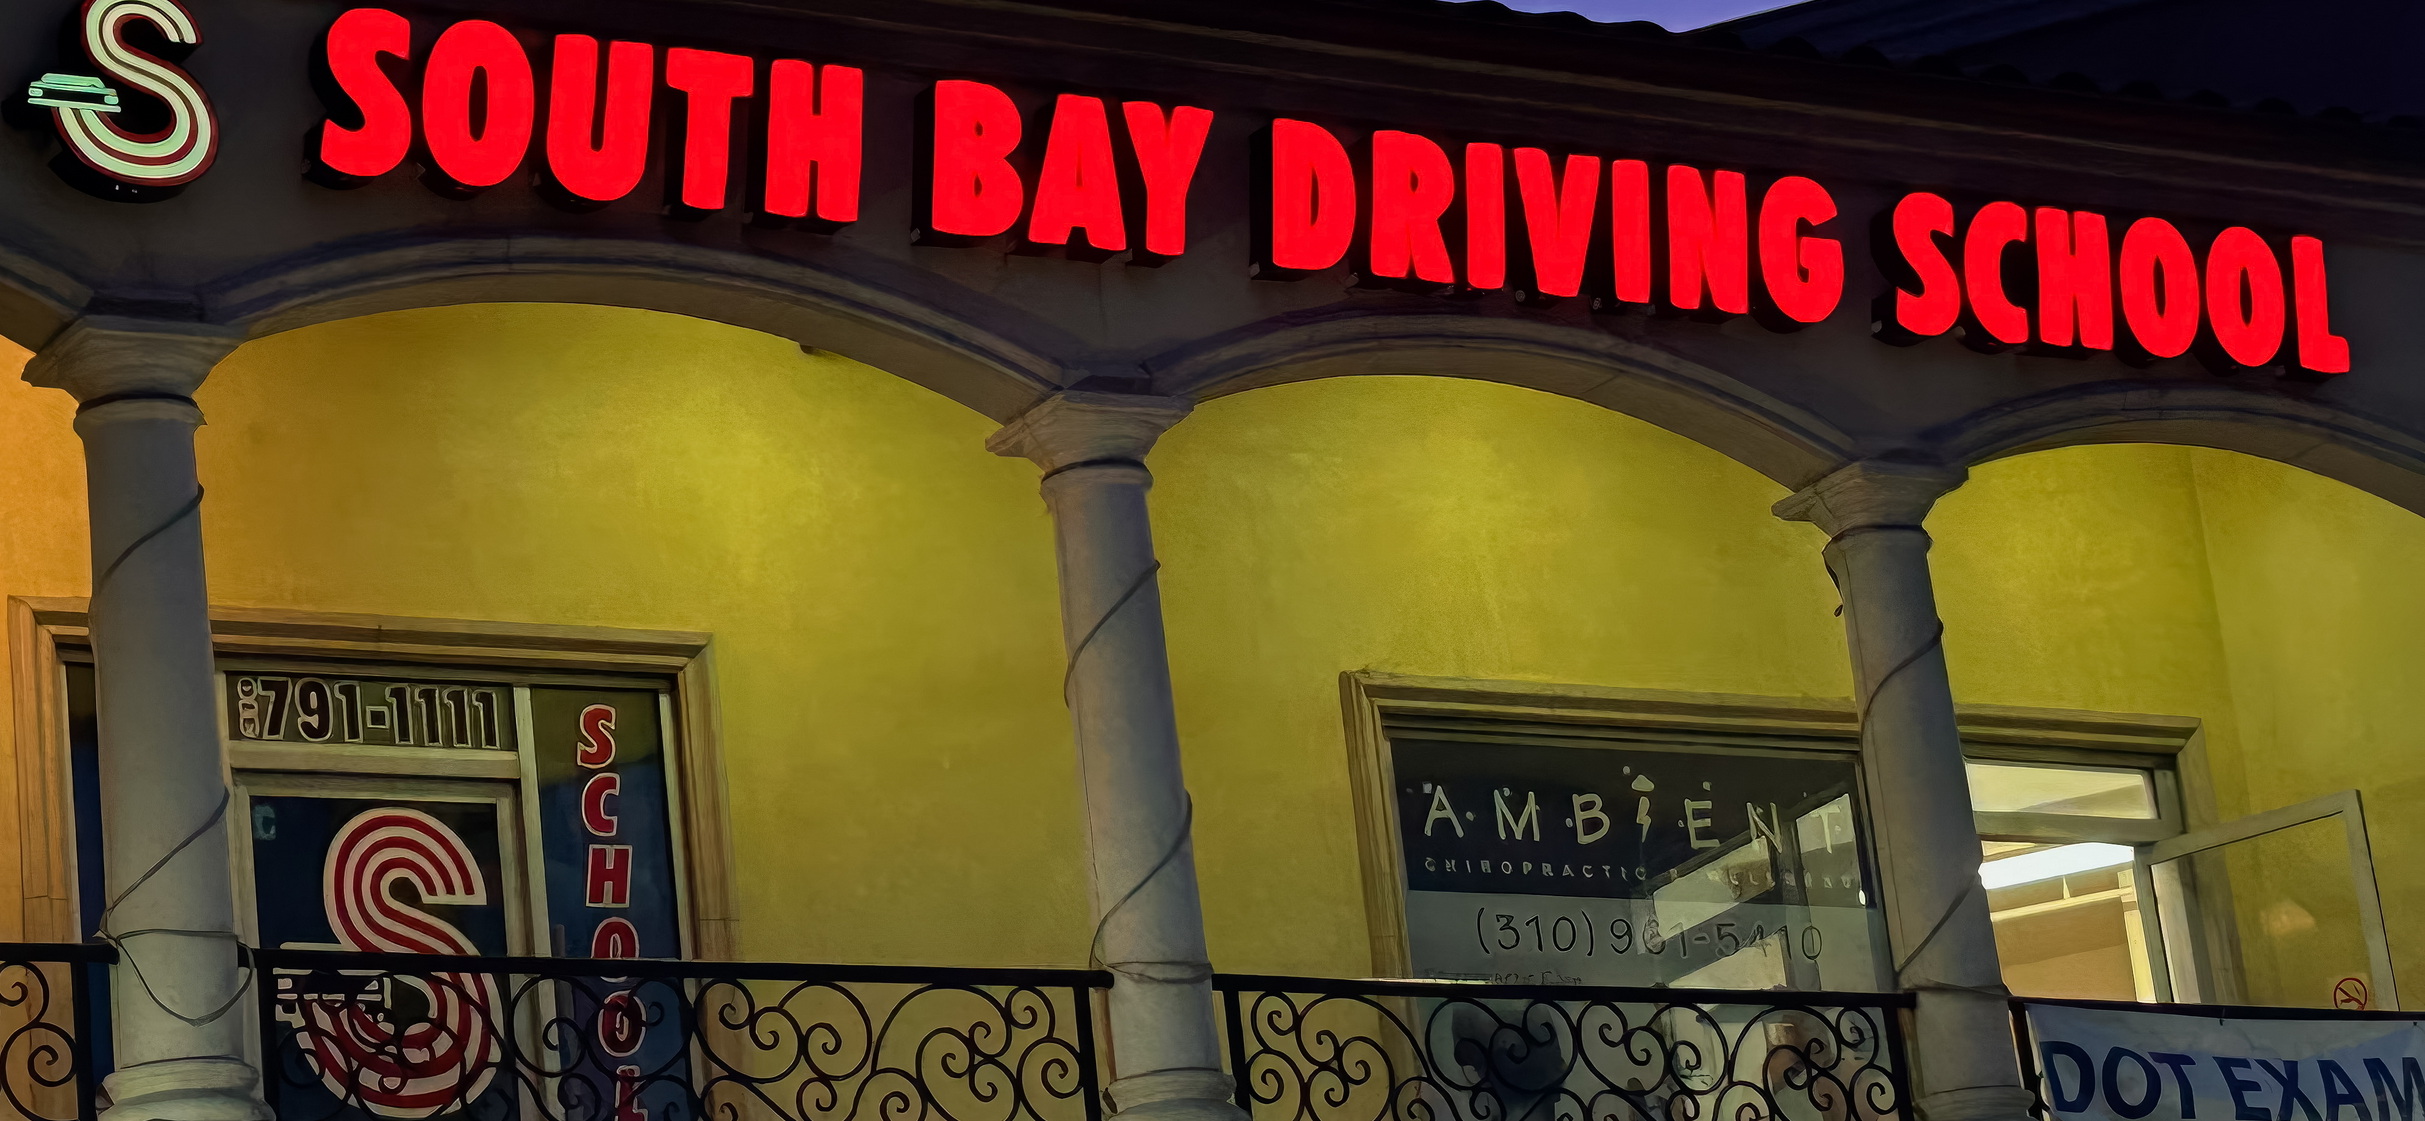 southbay driving school